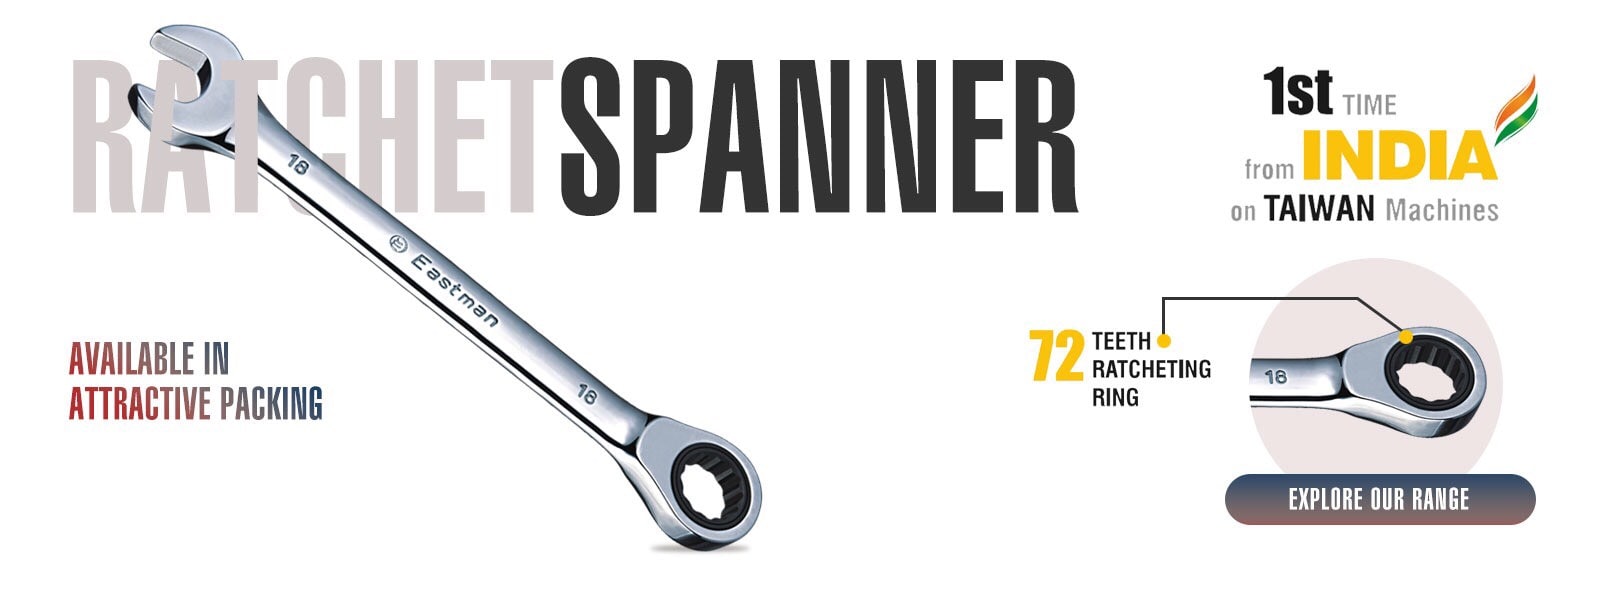 ratchet-spanner-manufacture-india